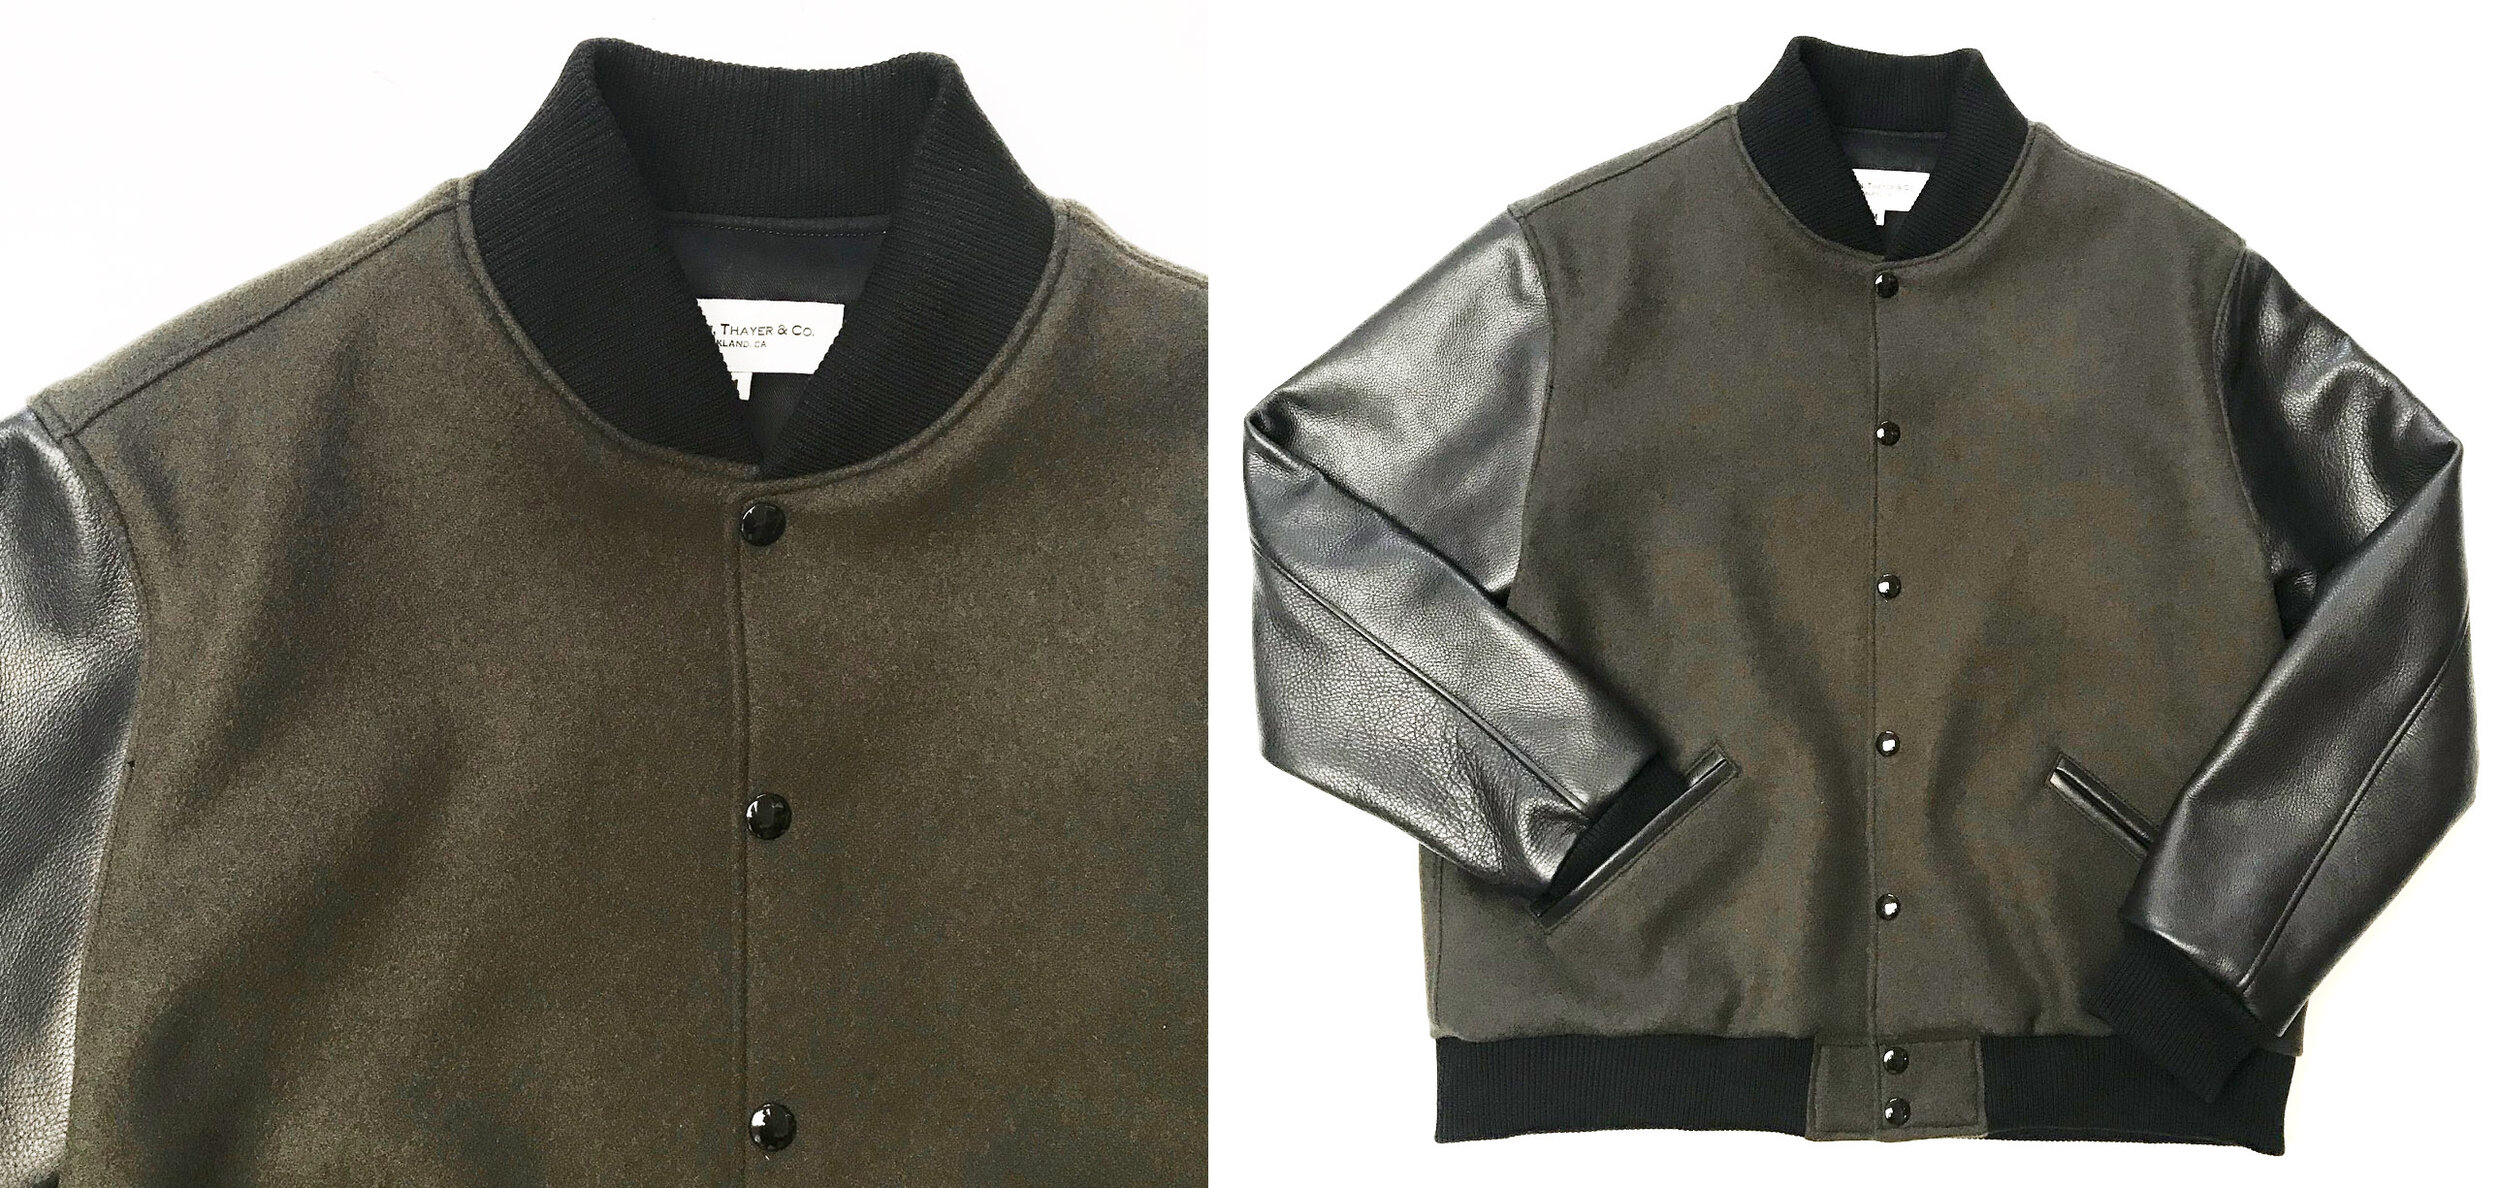  Olive wool body, black leather sleeves 